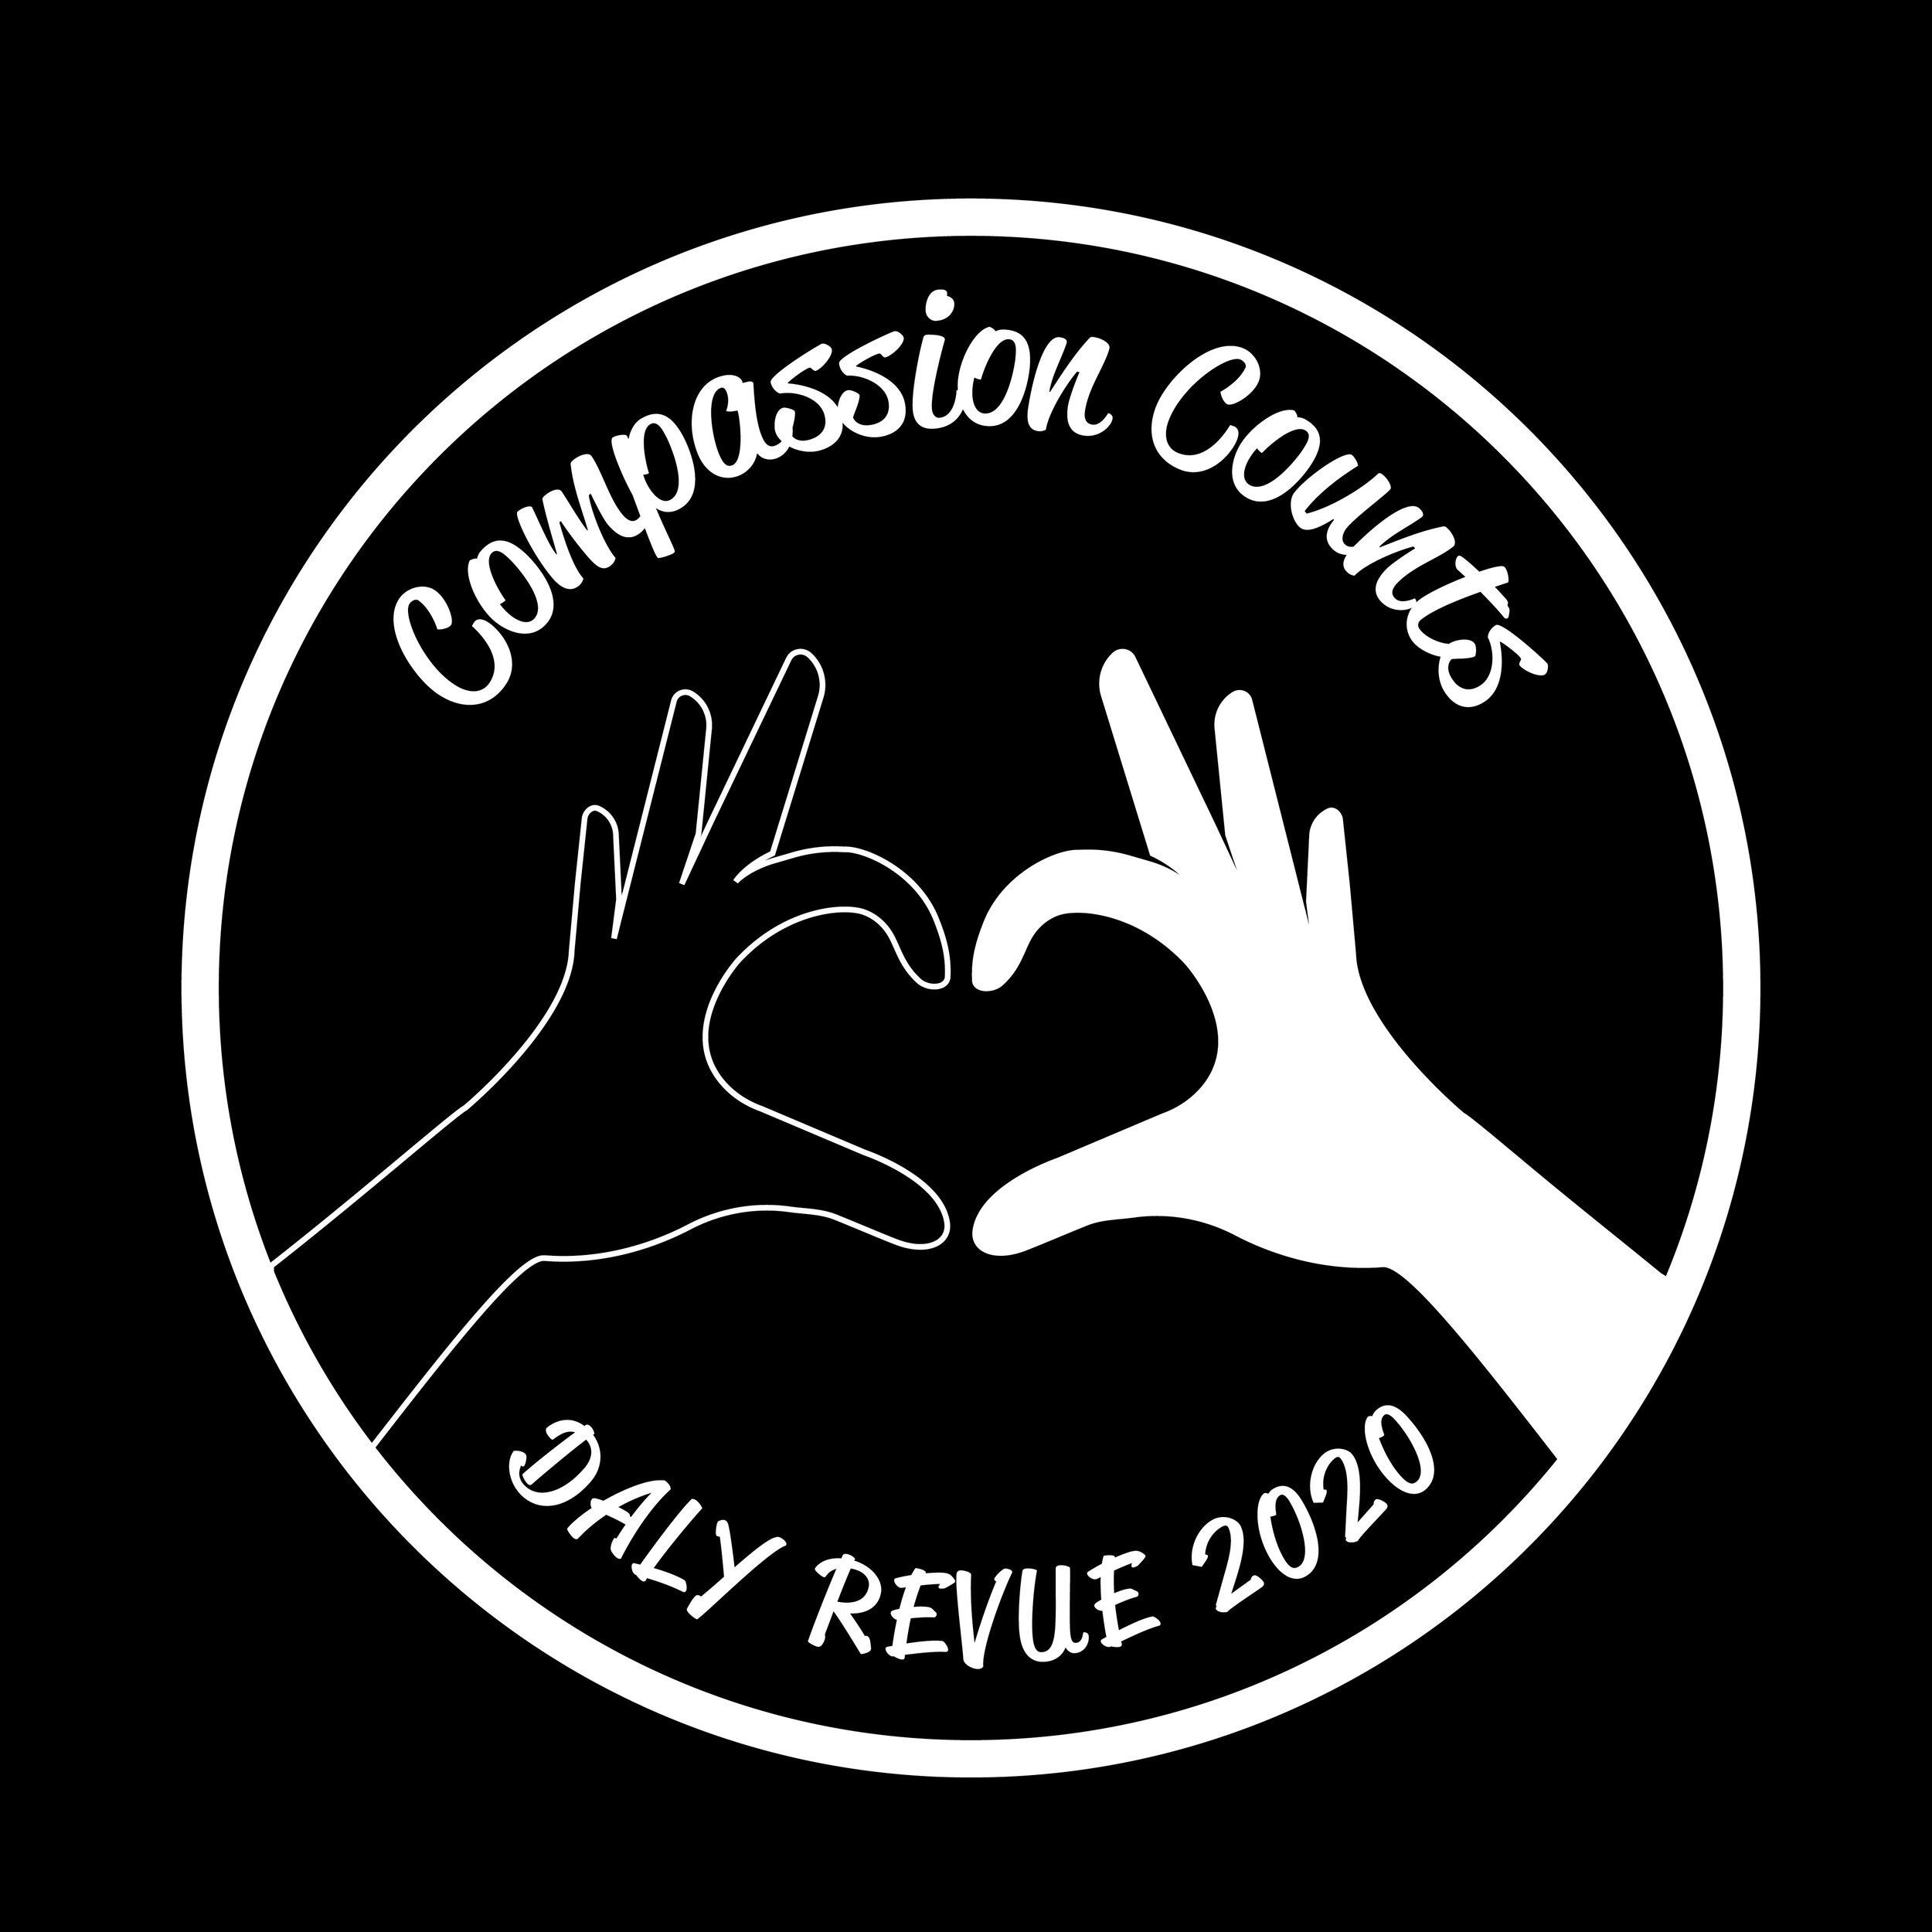 Daly Elementary School Compassion Counts logo